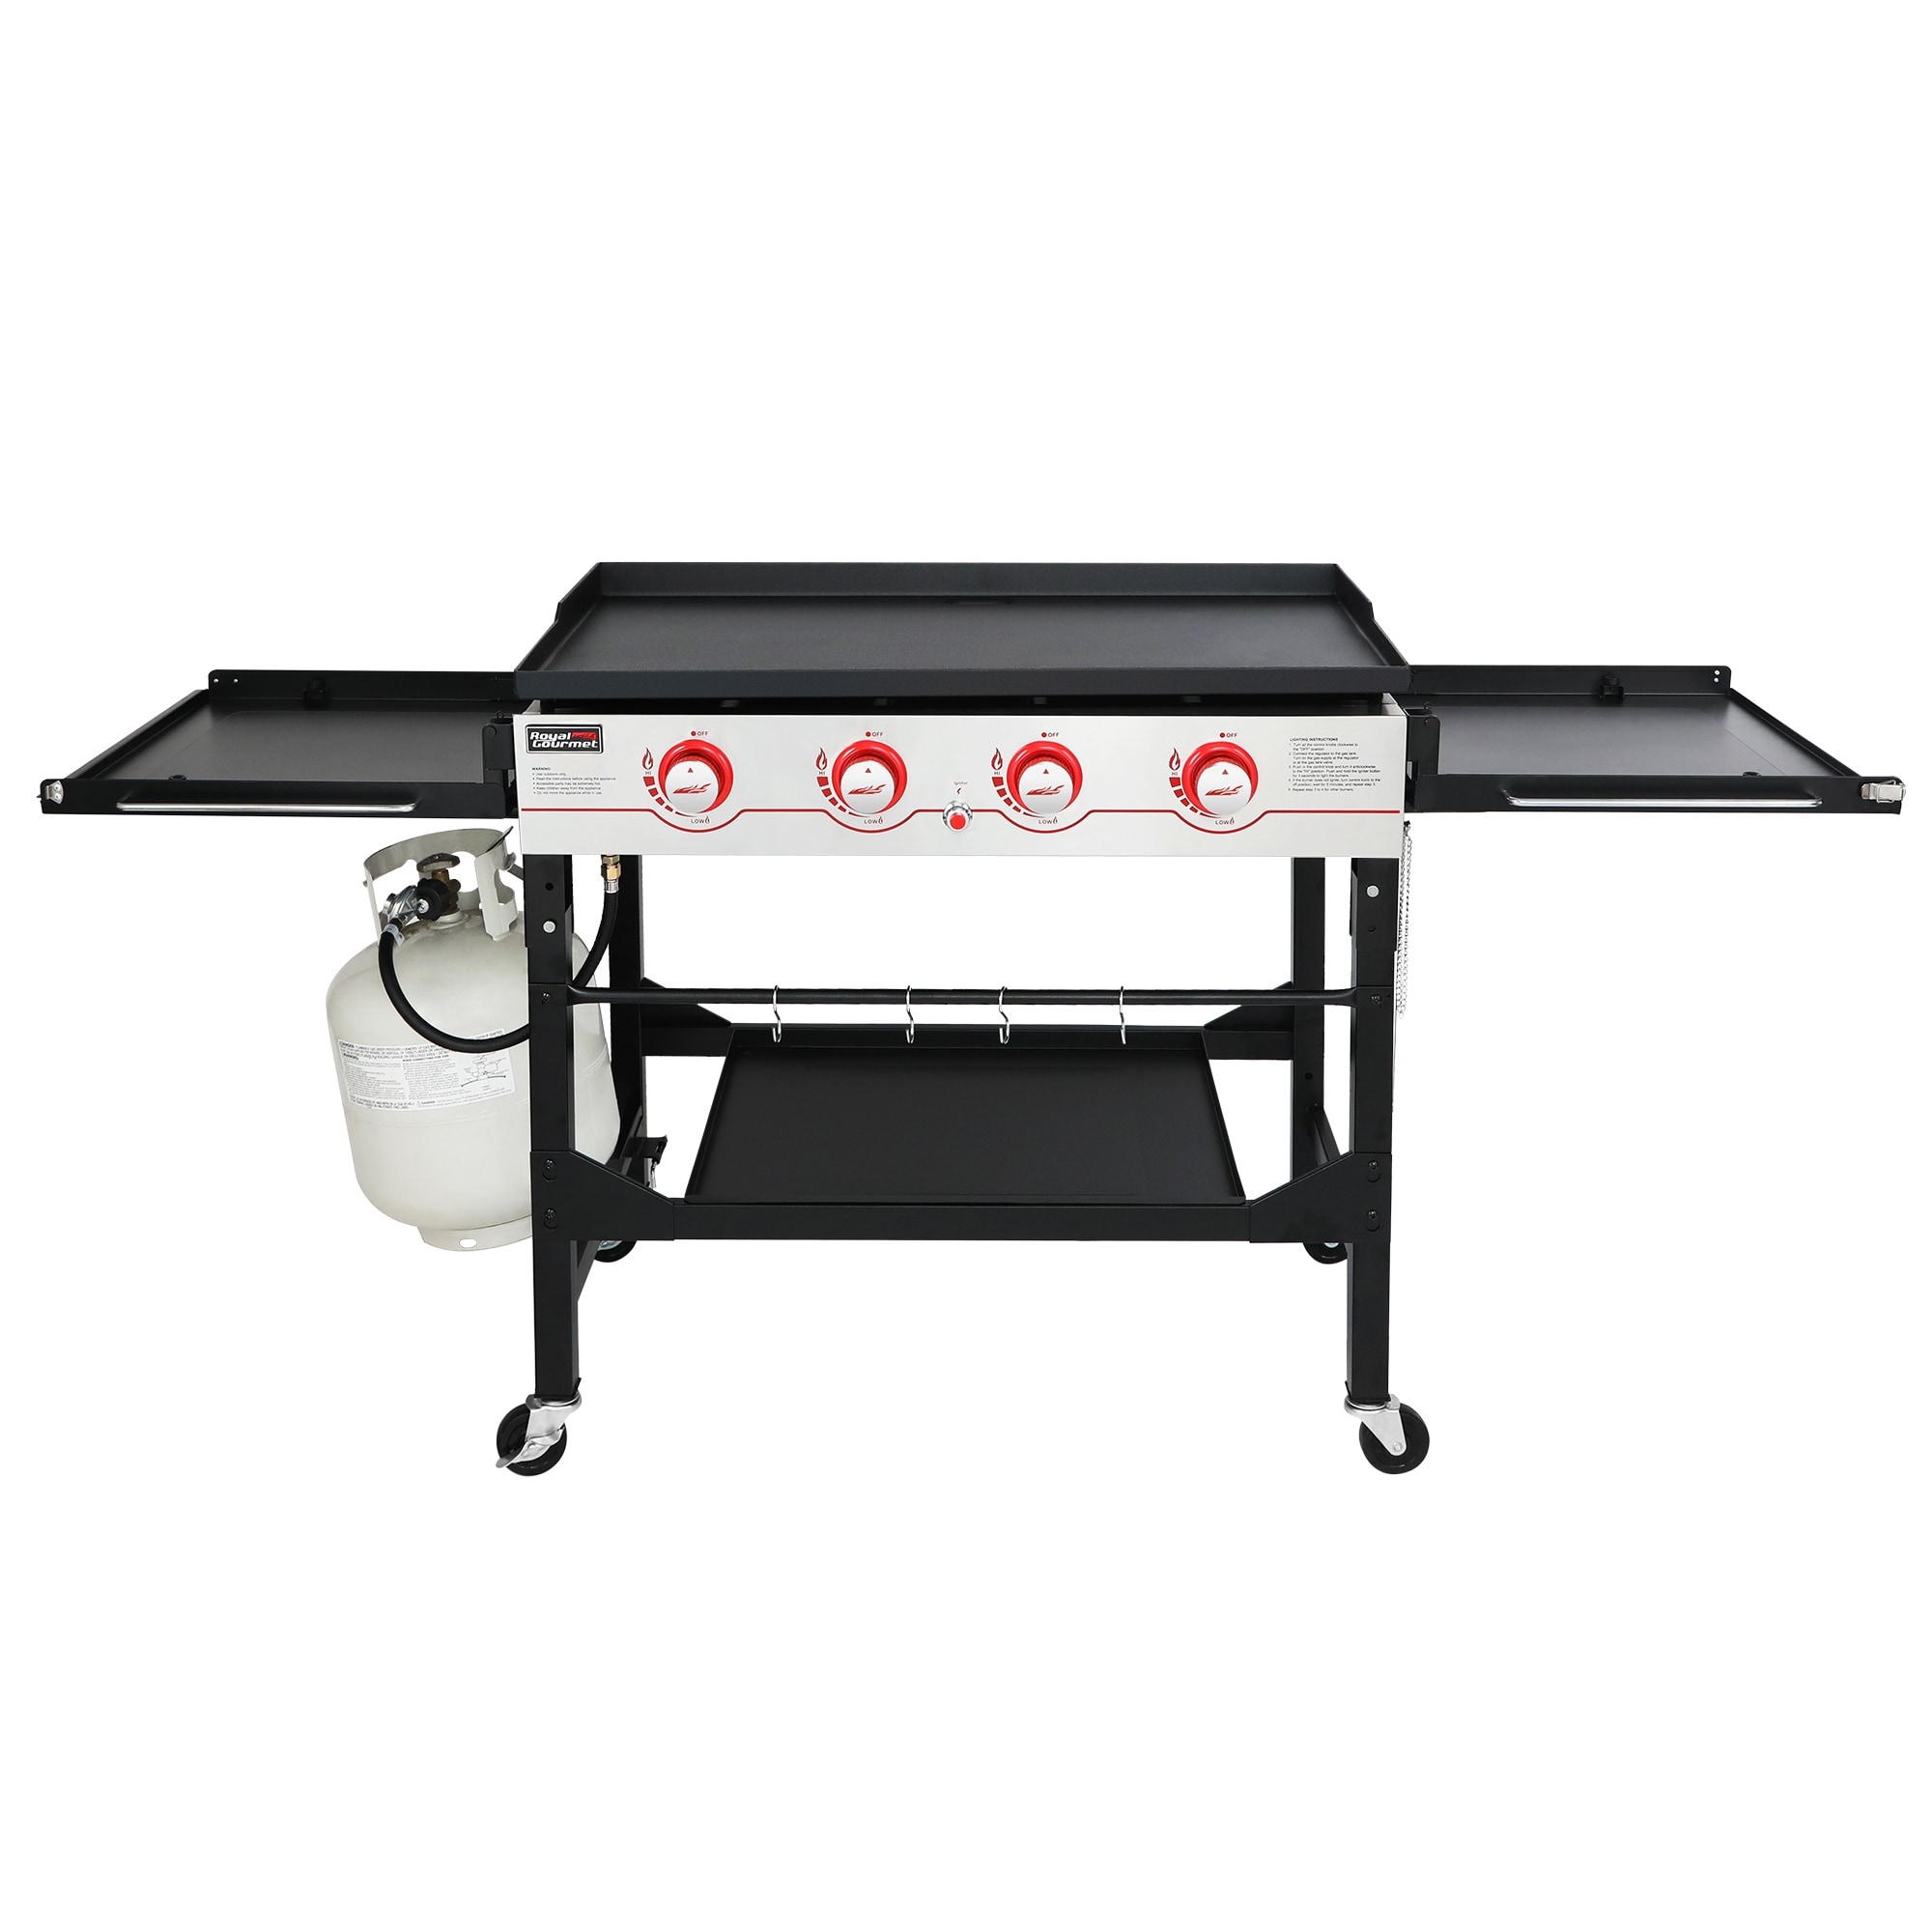 Royal Gourmet 36-Inch Gas Griddle 4-Burner Flat Top Propane Grill Outdoor  BBQ